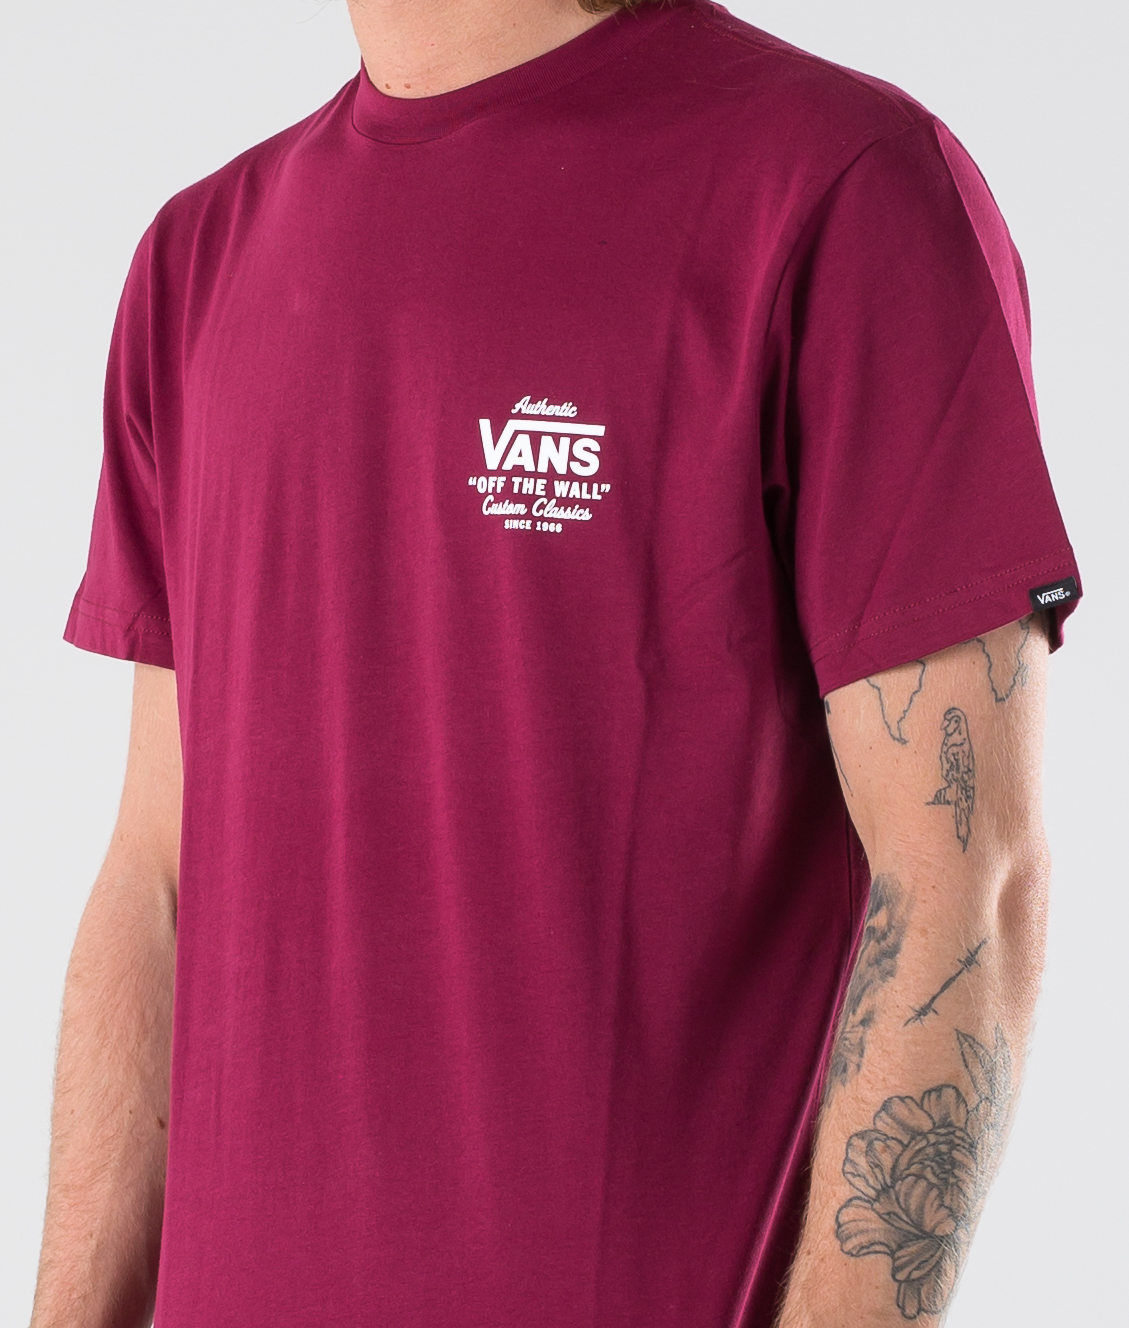 red and white vans t shirt